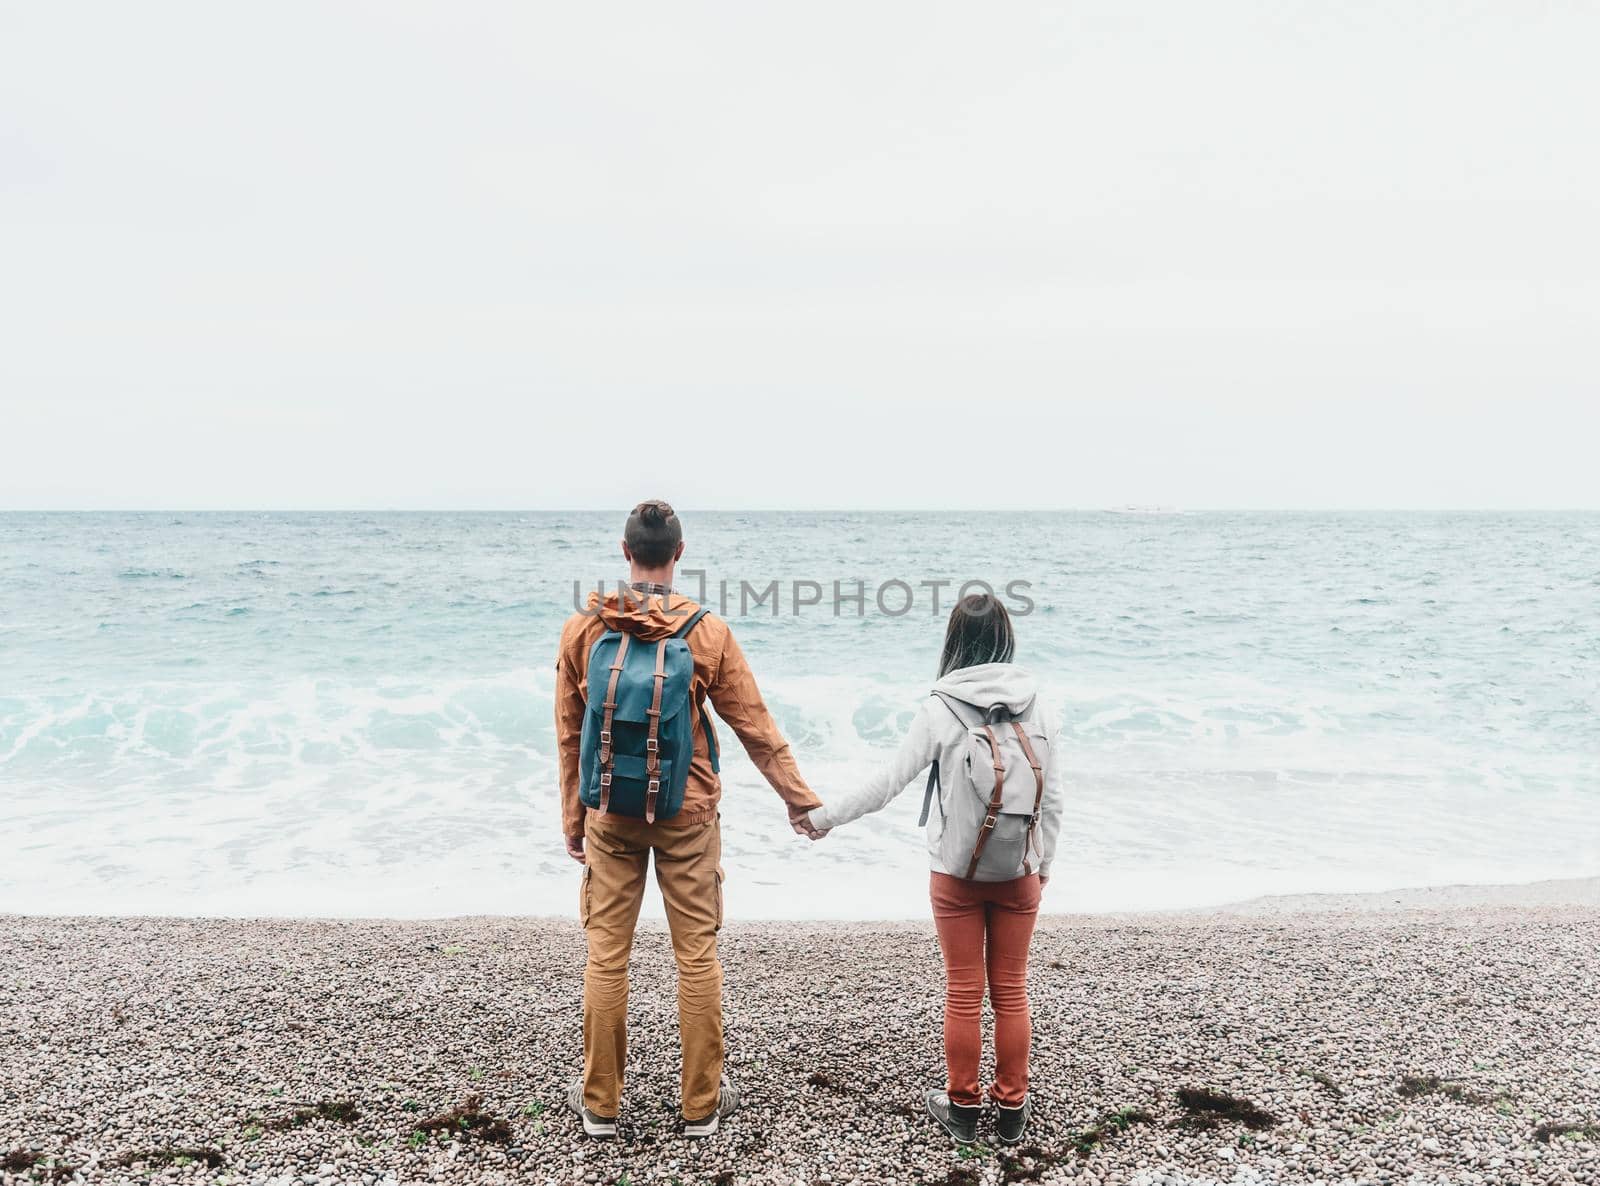 Traveler backpacker young couple in love standing on shore and enjoying view of sea.